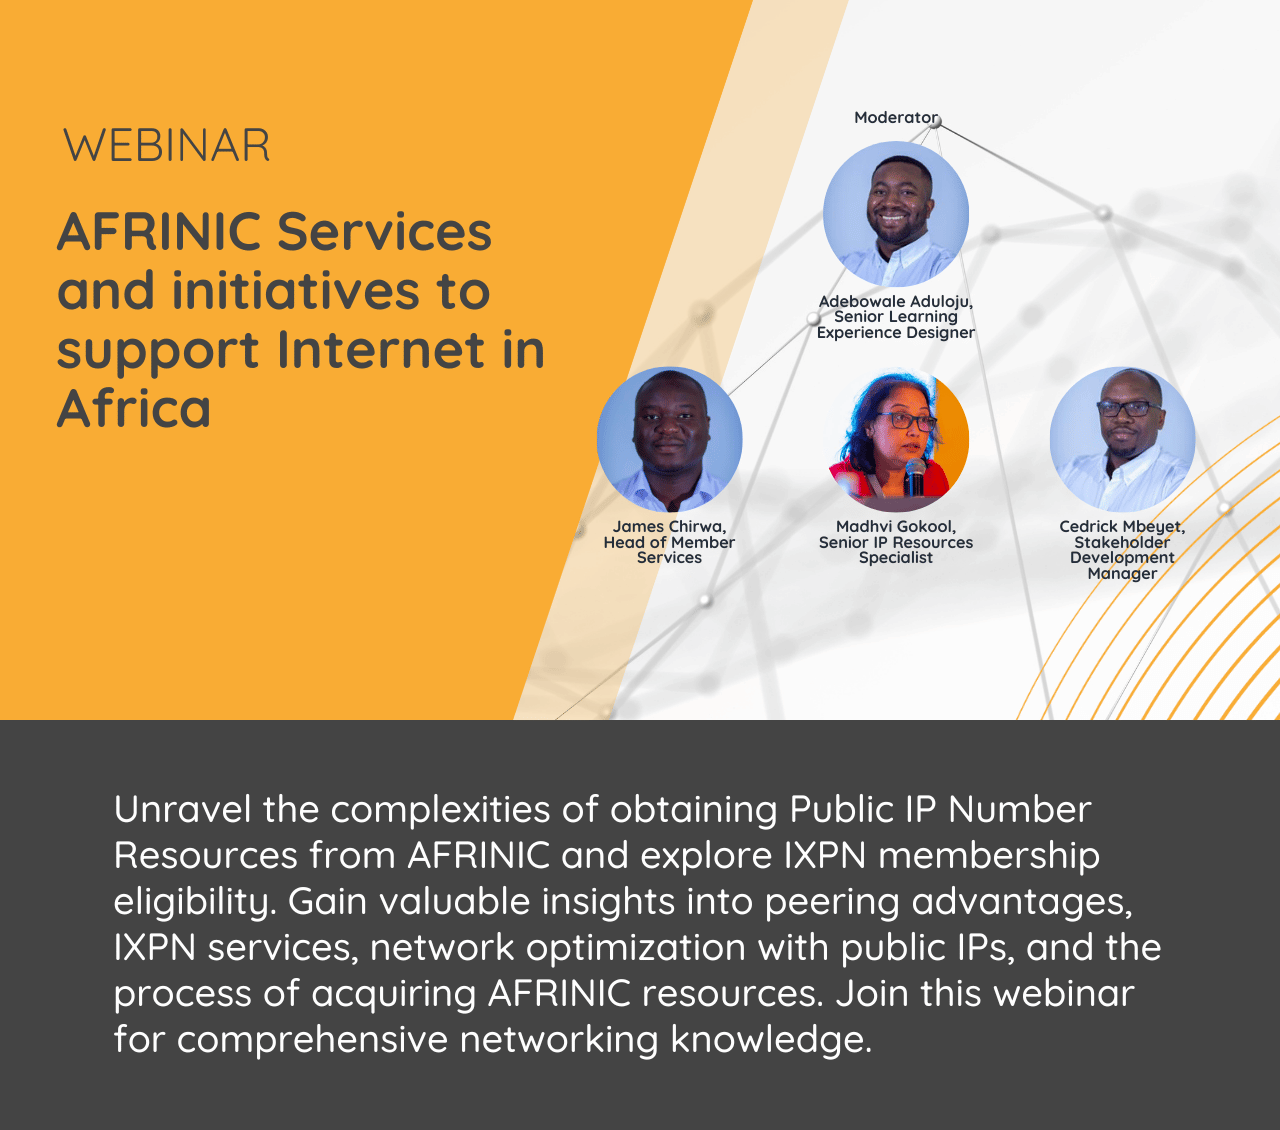 AFRINIC services and Initiatives